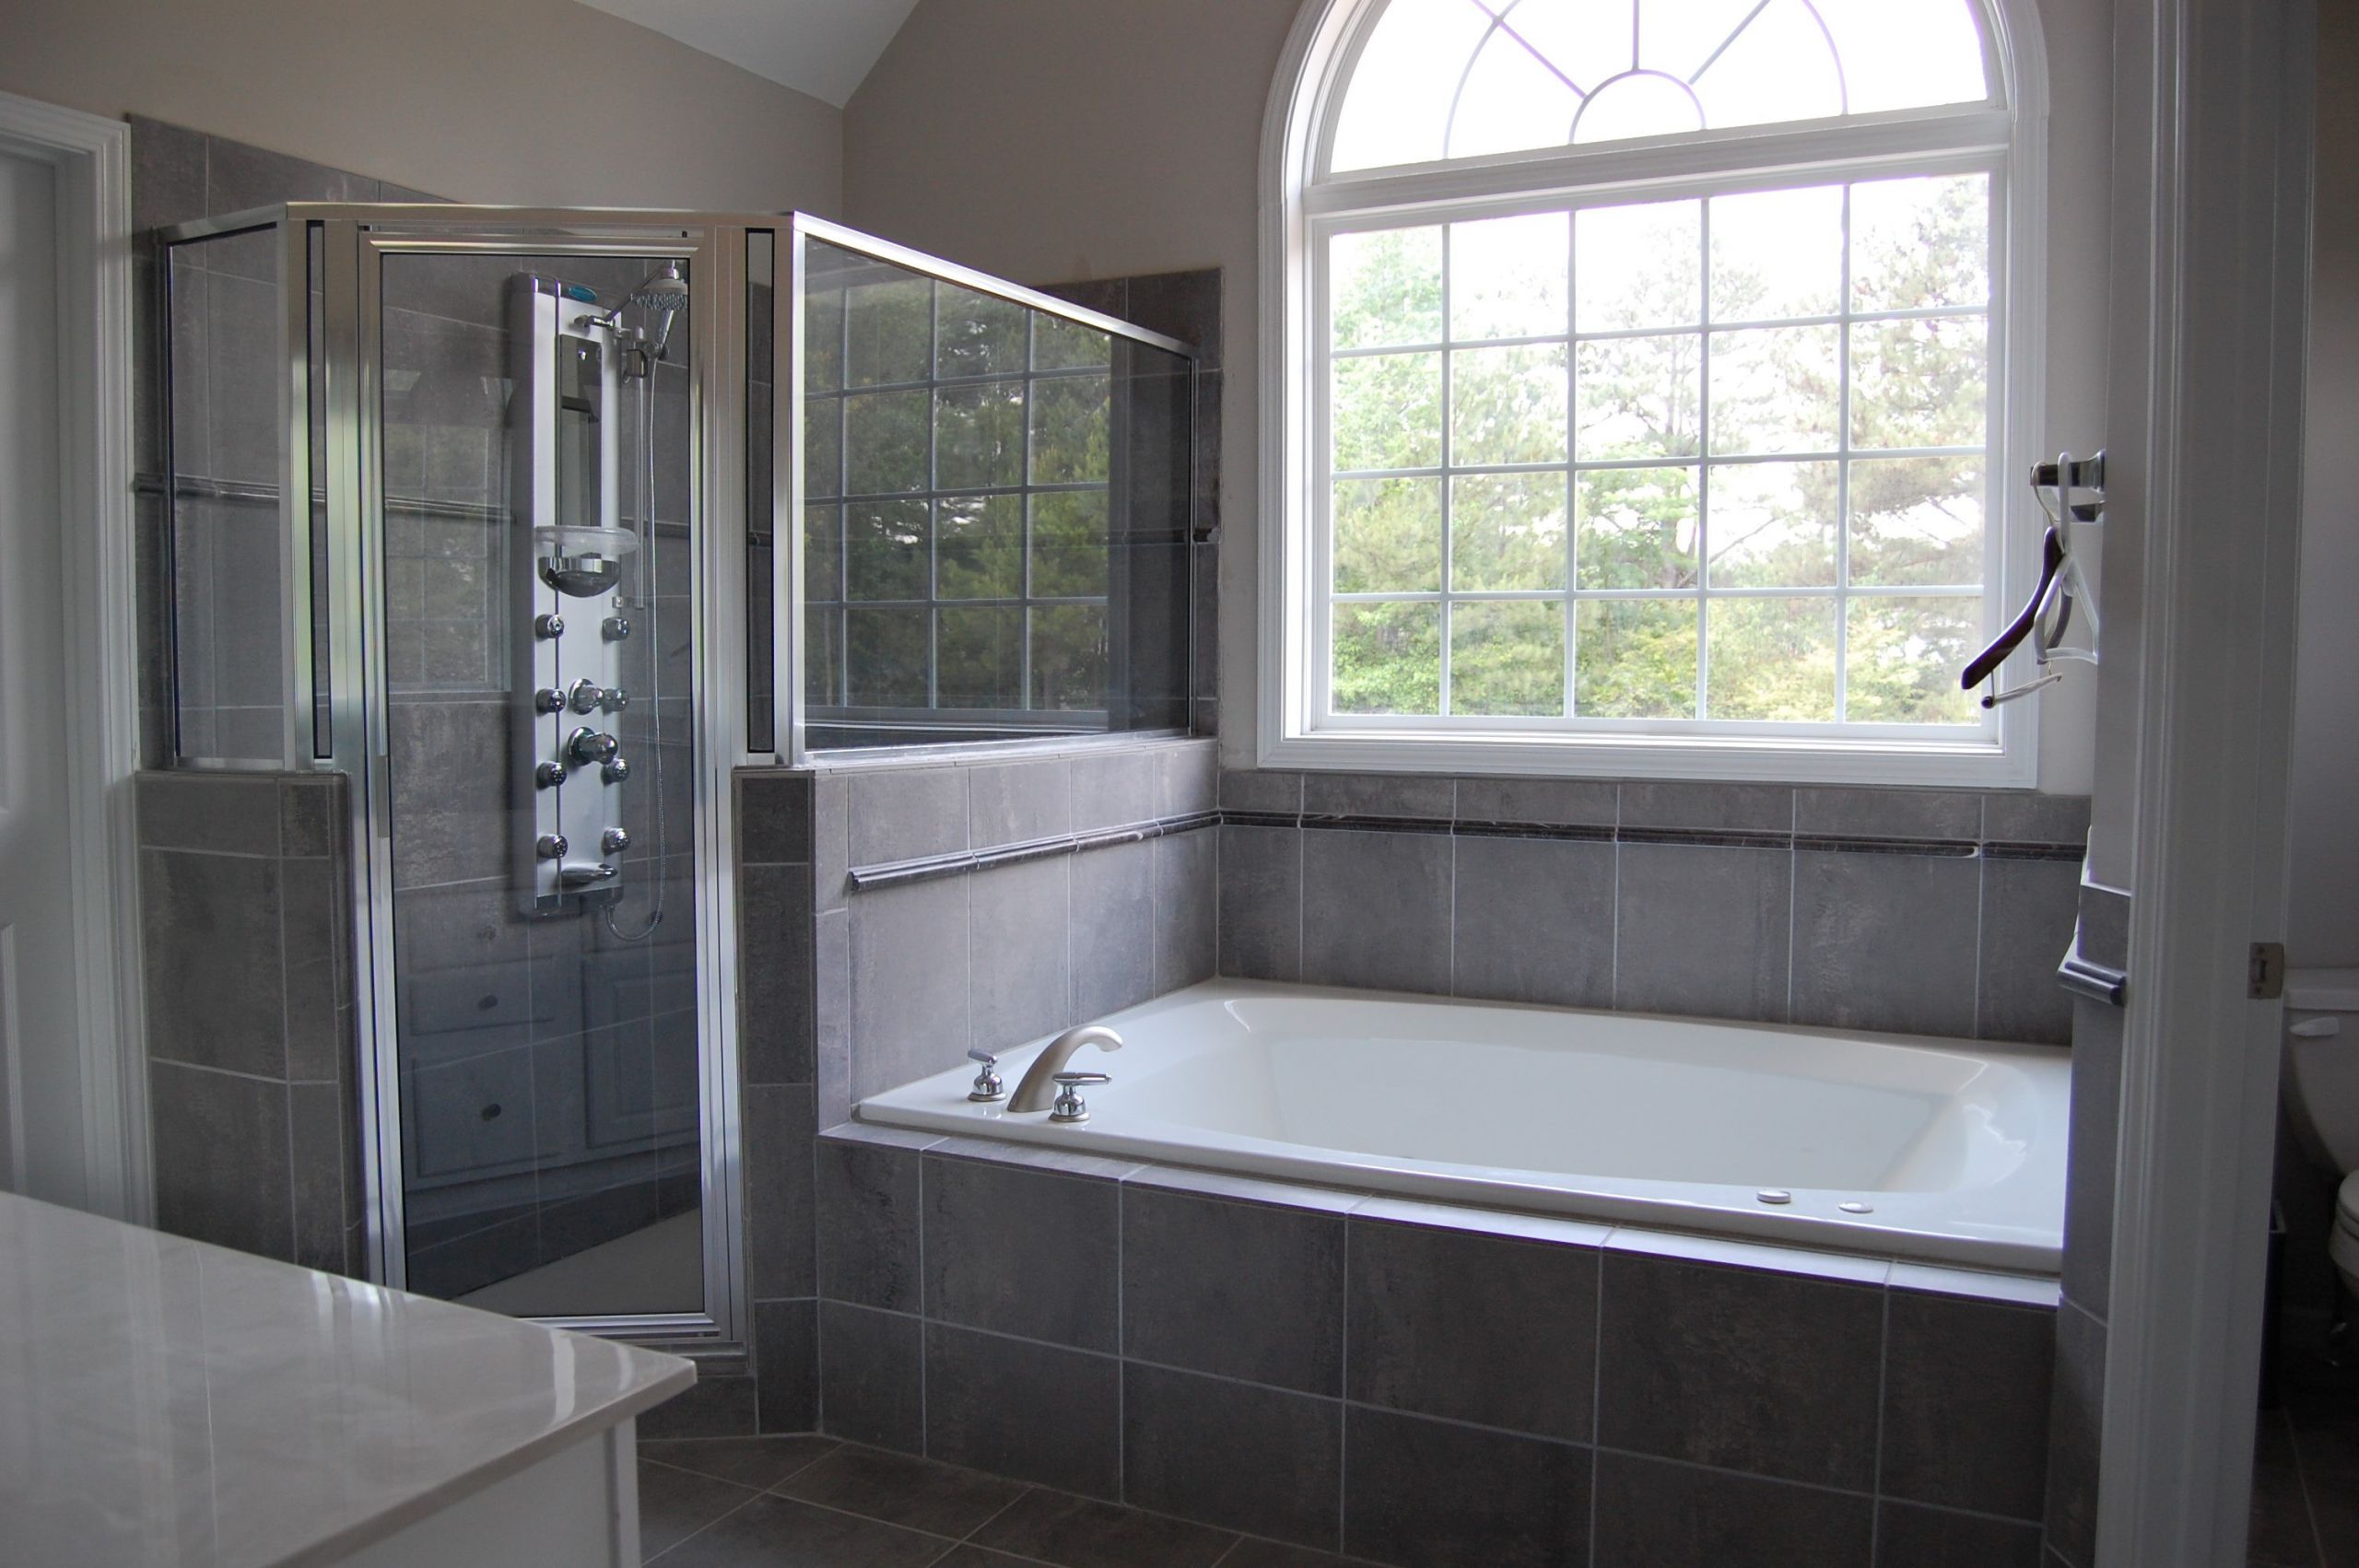 Home Depot Bathrooms Remodeling
 Lovely Home Depot Bathroom Remodel Decoration Bathroom